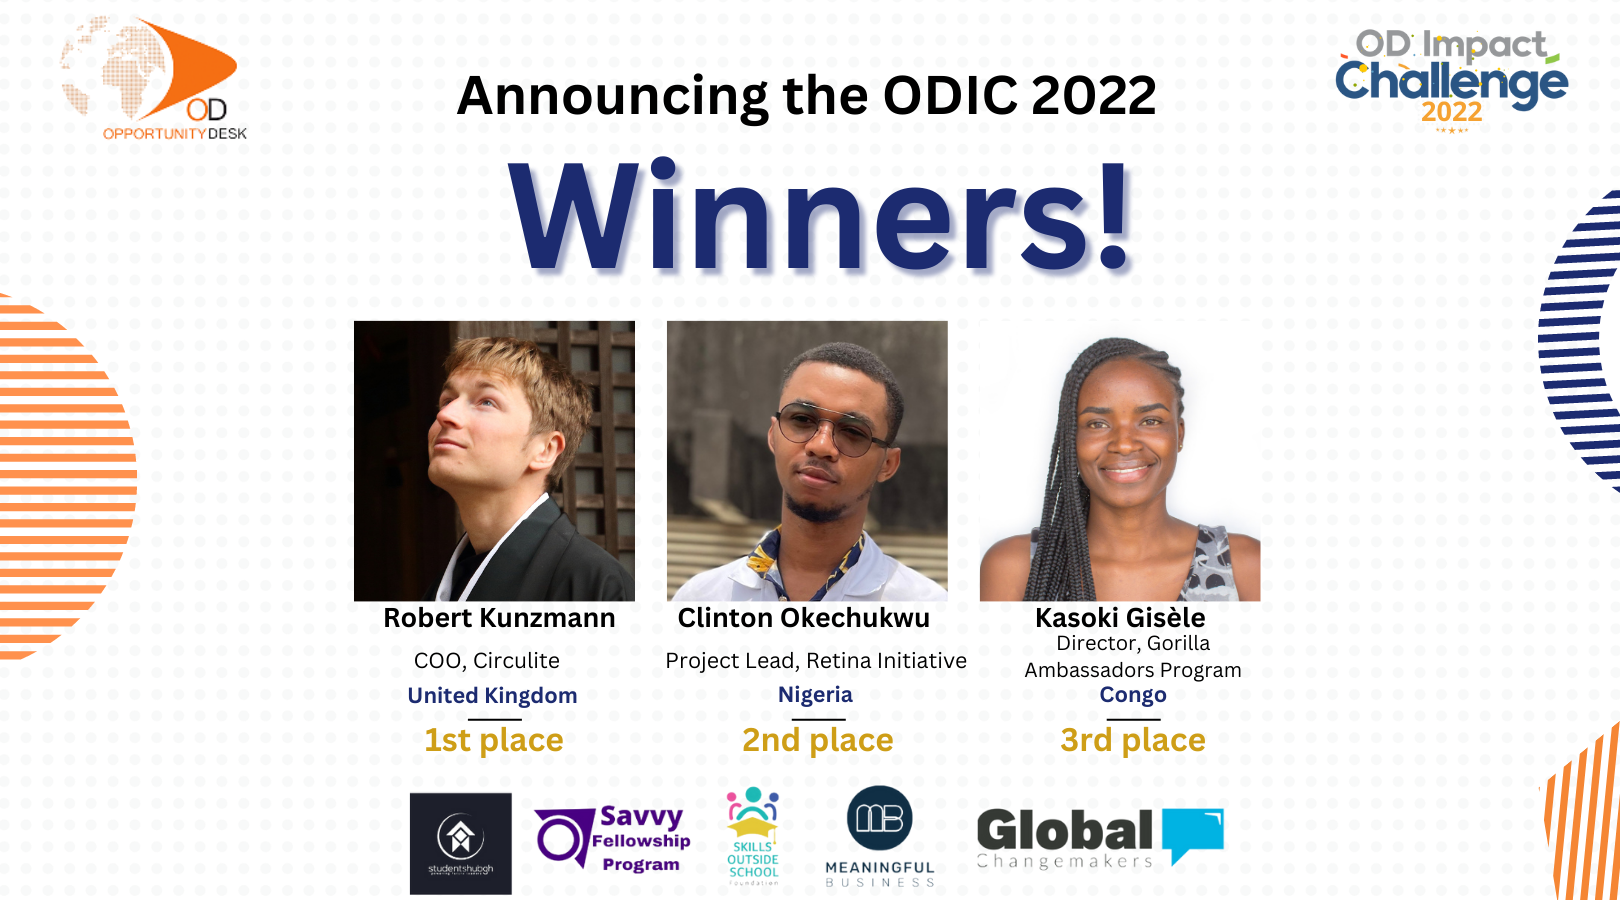 Announcing the OD Impact Challenge 2022 Winners!